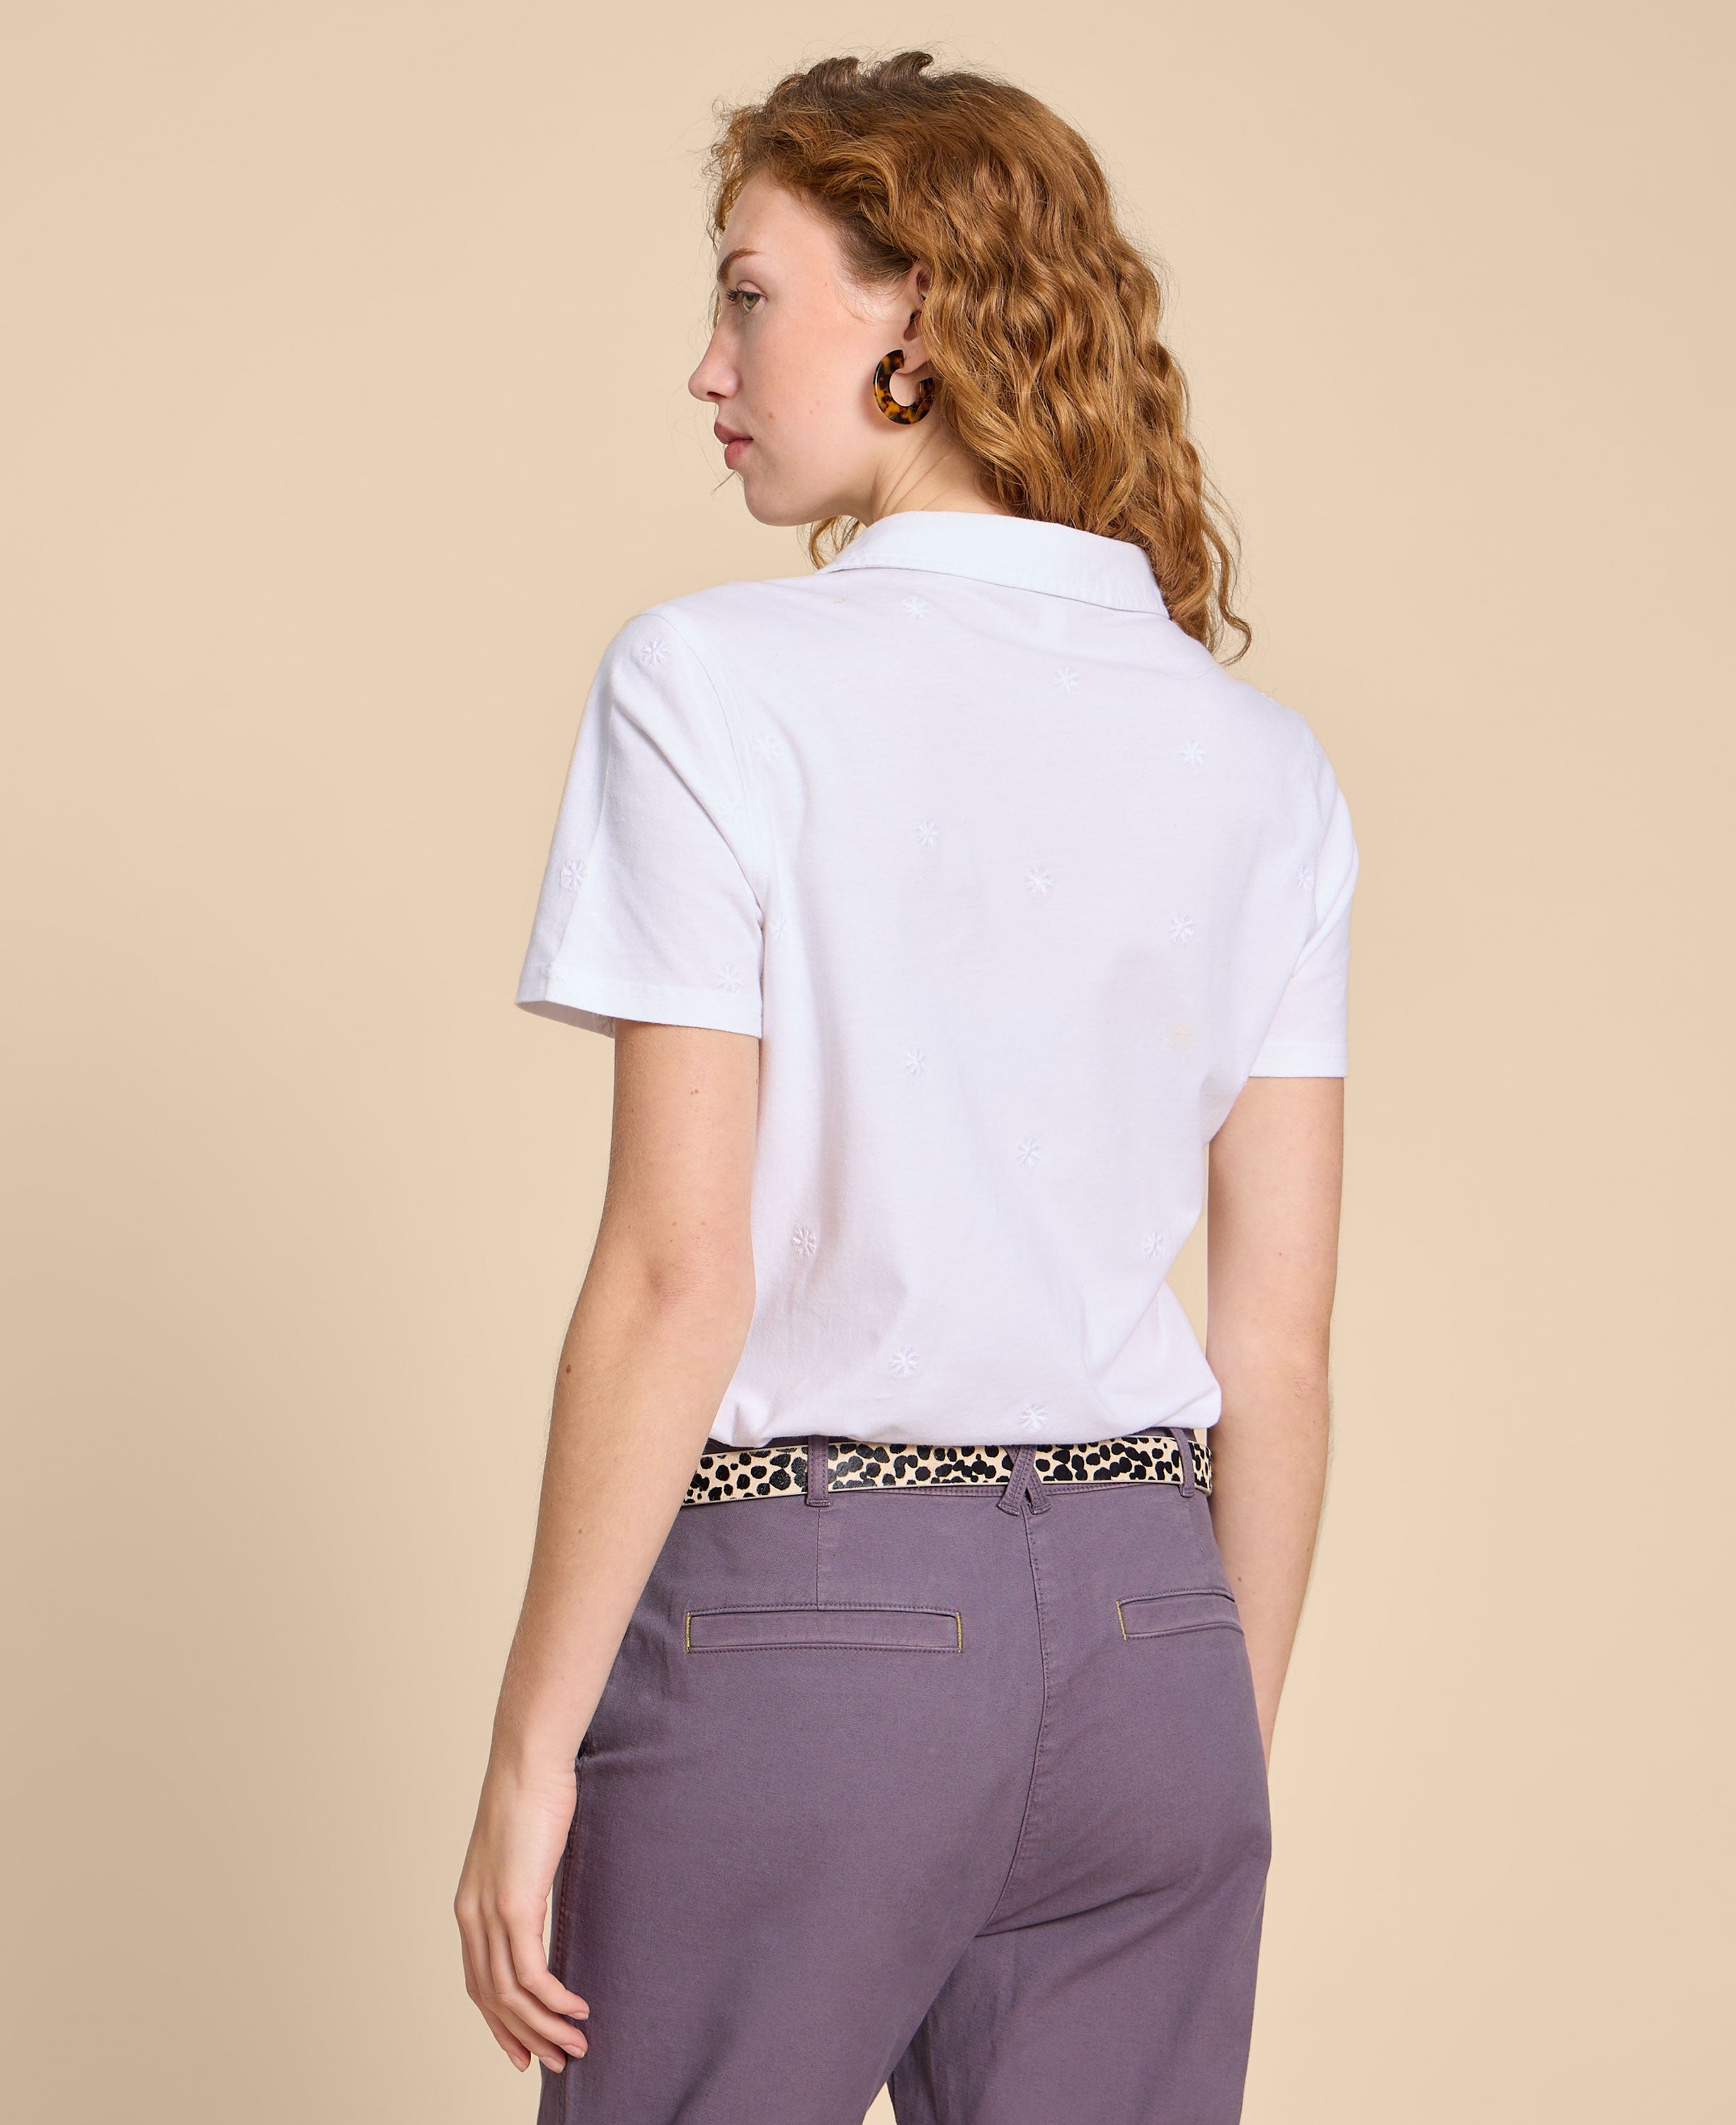 Penny Pocket Embroidered Shirt - Pale Ivory